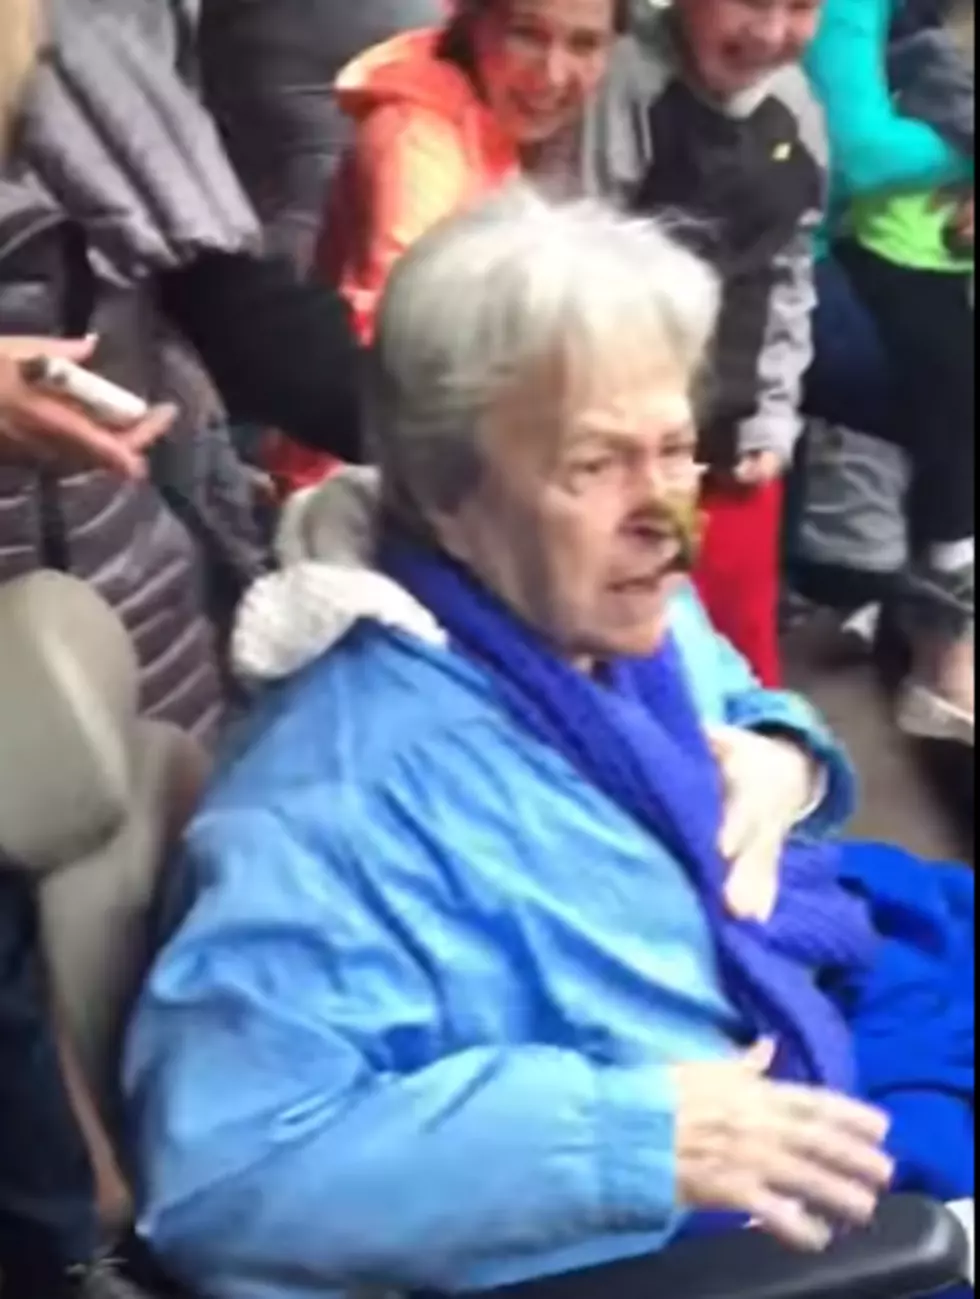 Grandma Gets a Smelly Surprise at Zoo [VIDEO]